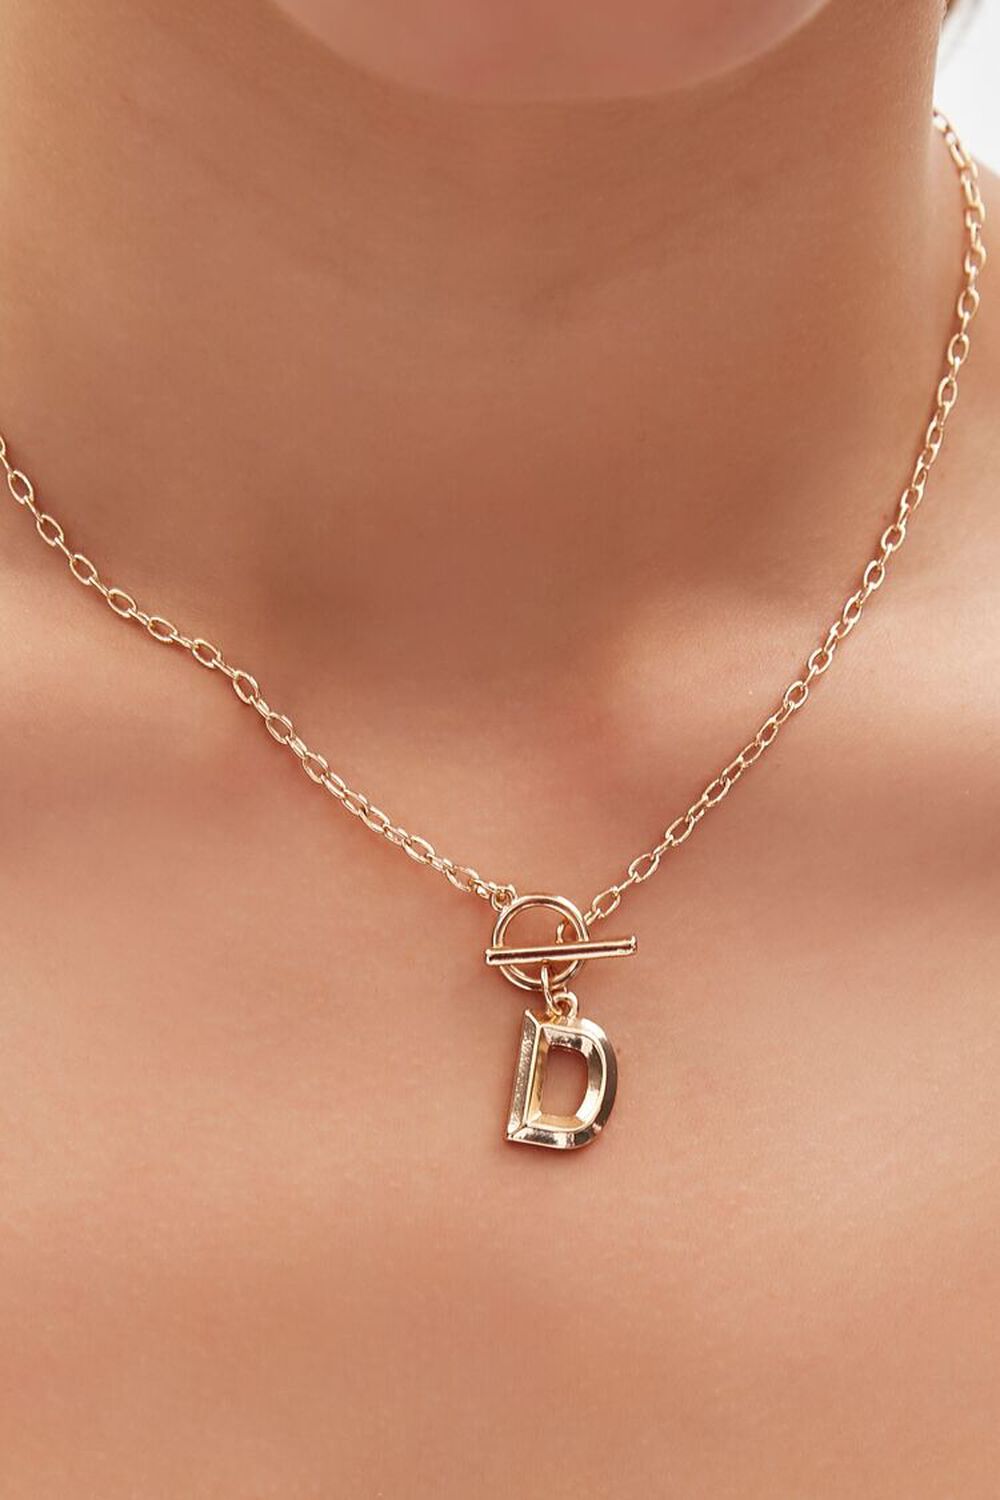 GOLD/D Initial Pendant Toggle Necklace, image 1